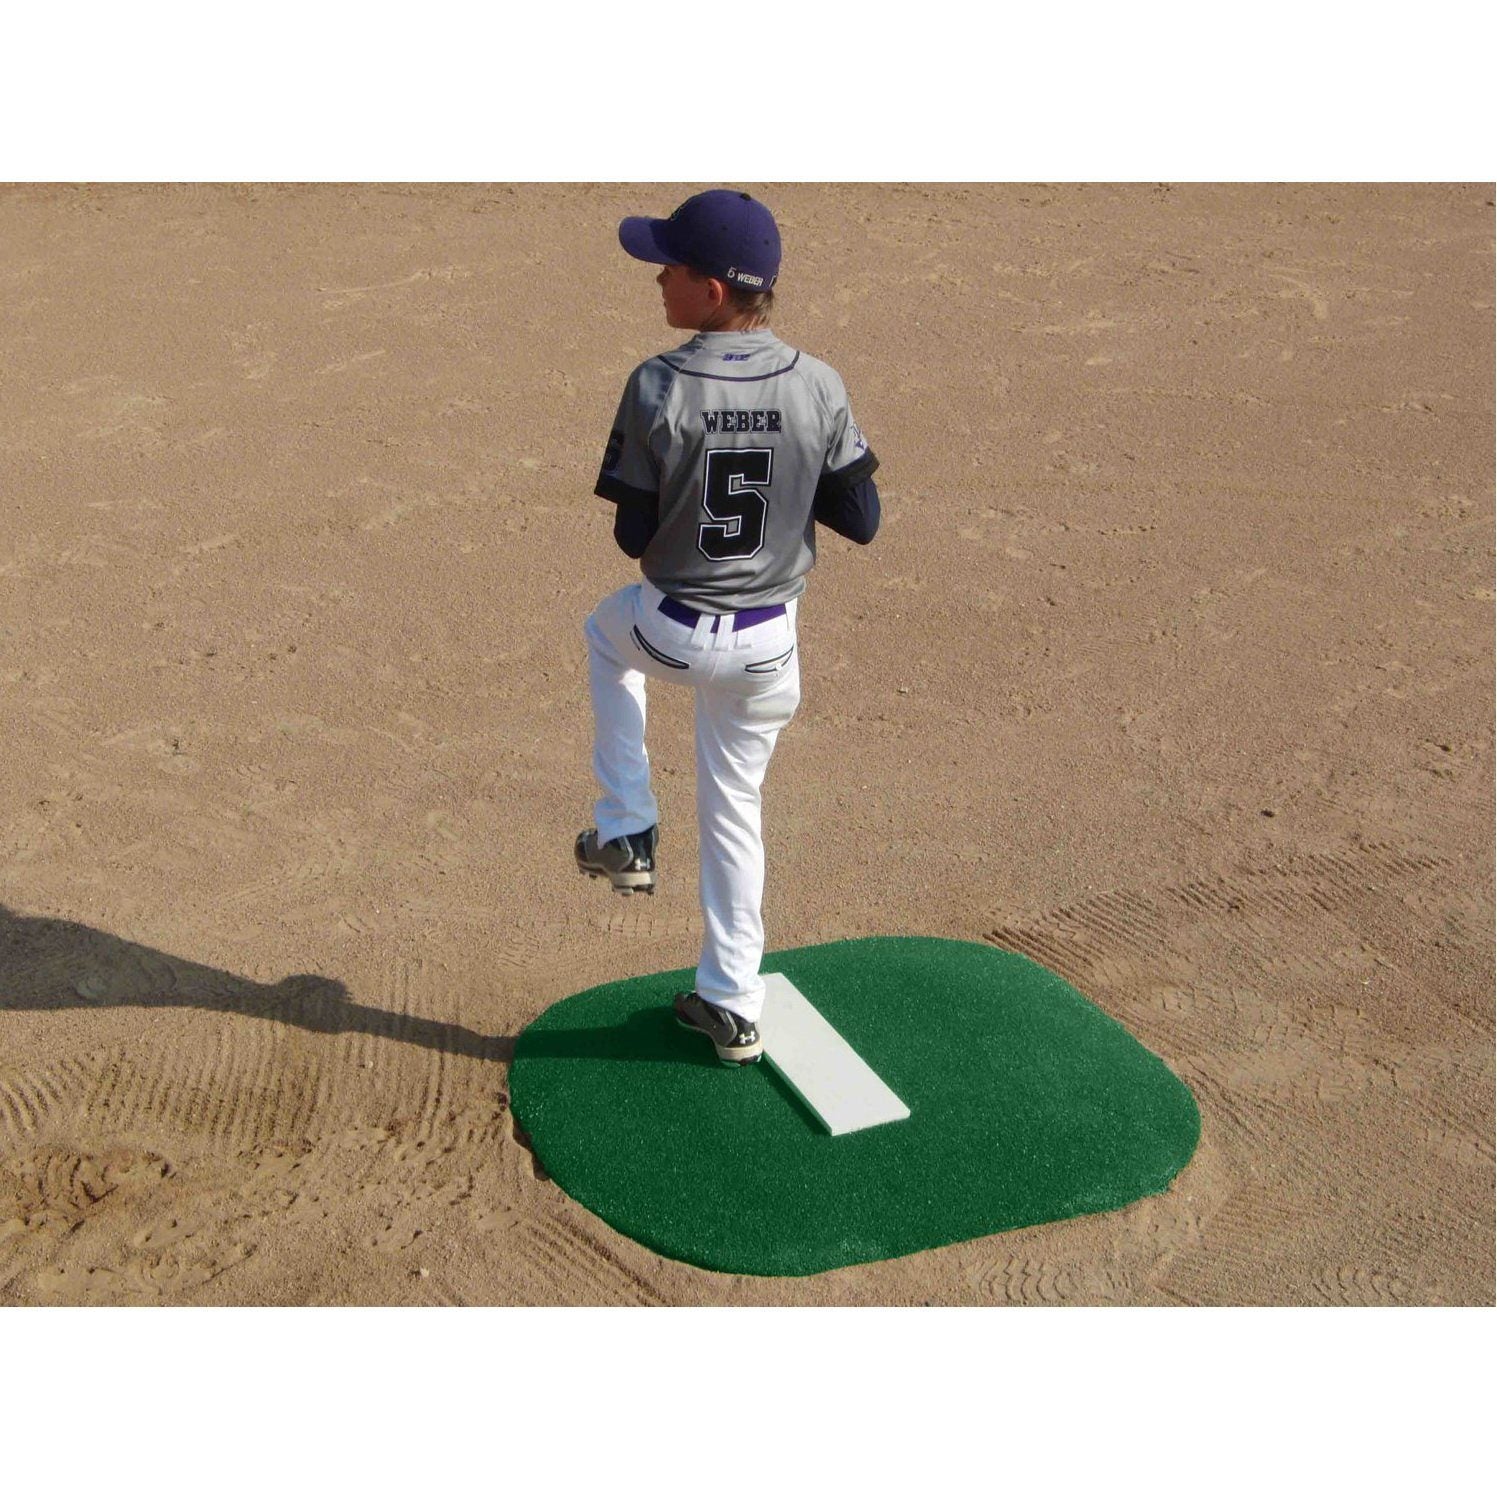 PortoLite 4" Stride Off Little League Portable Game Pitching Mound